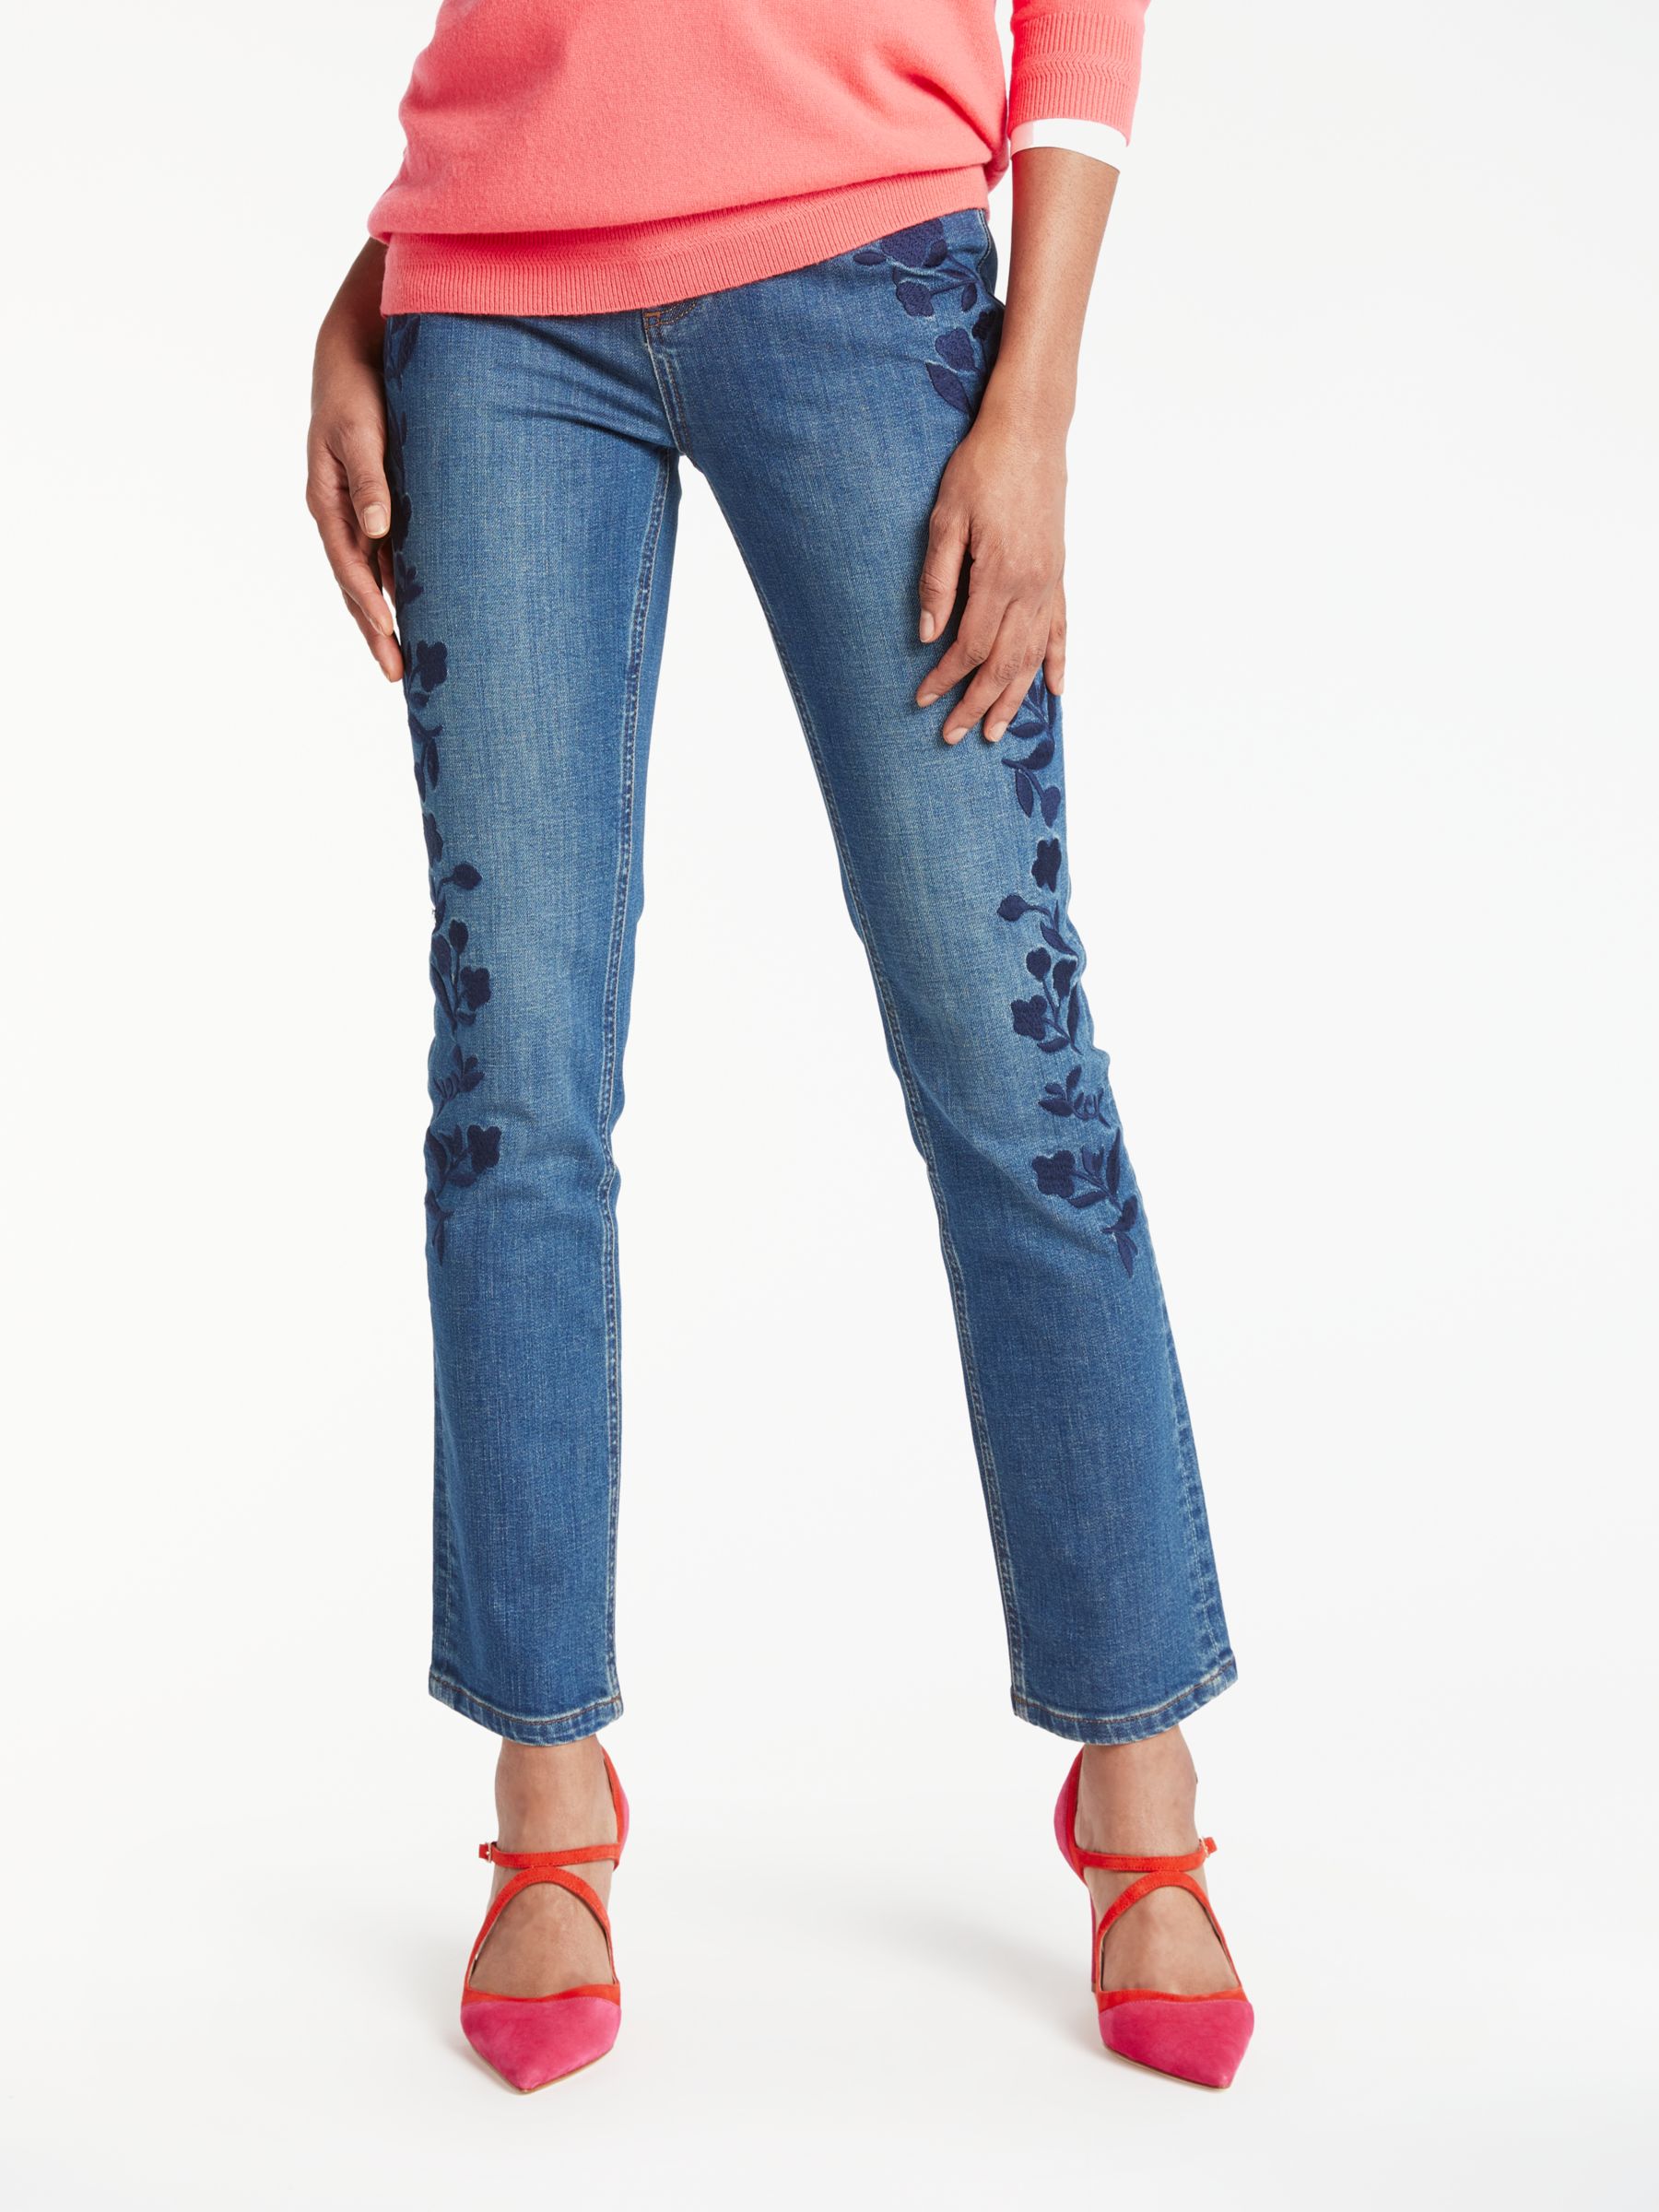 embroidered girlfriend jeans